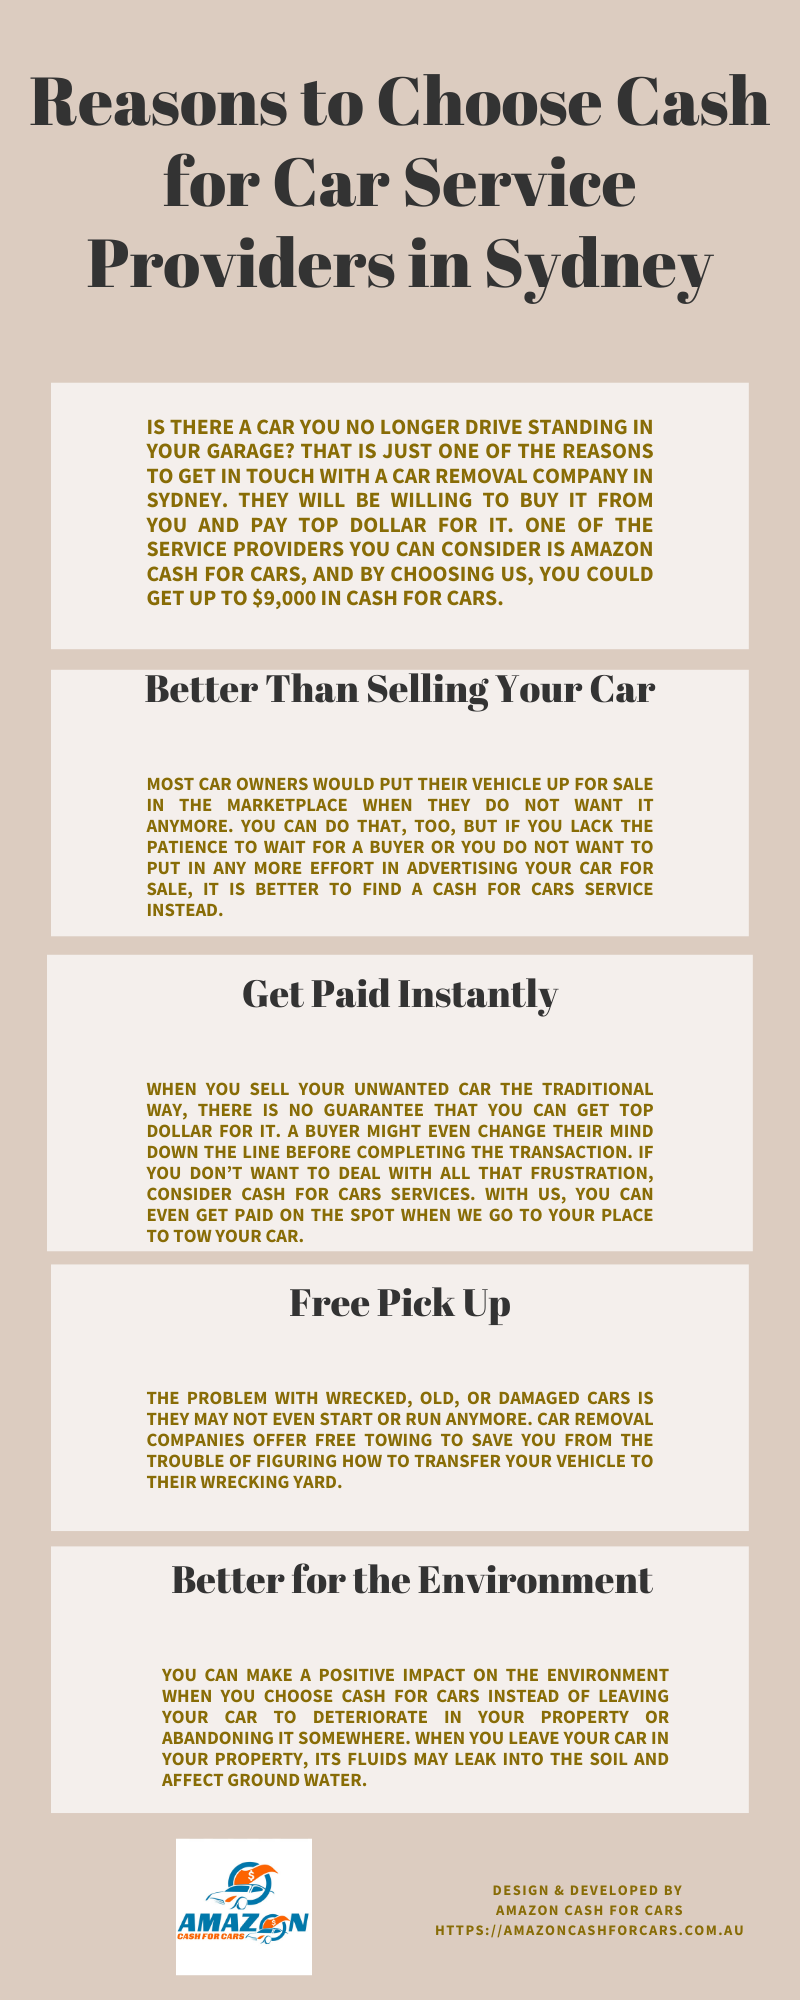 Reasons to Choose Cash for Car Service Providers in Sydney.png  by Amazoncashforcars